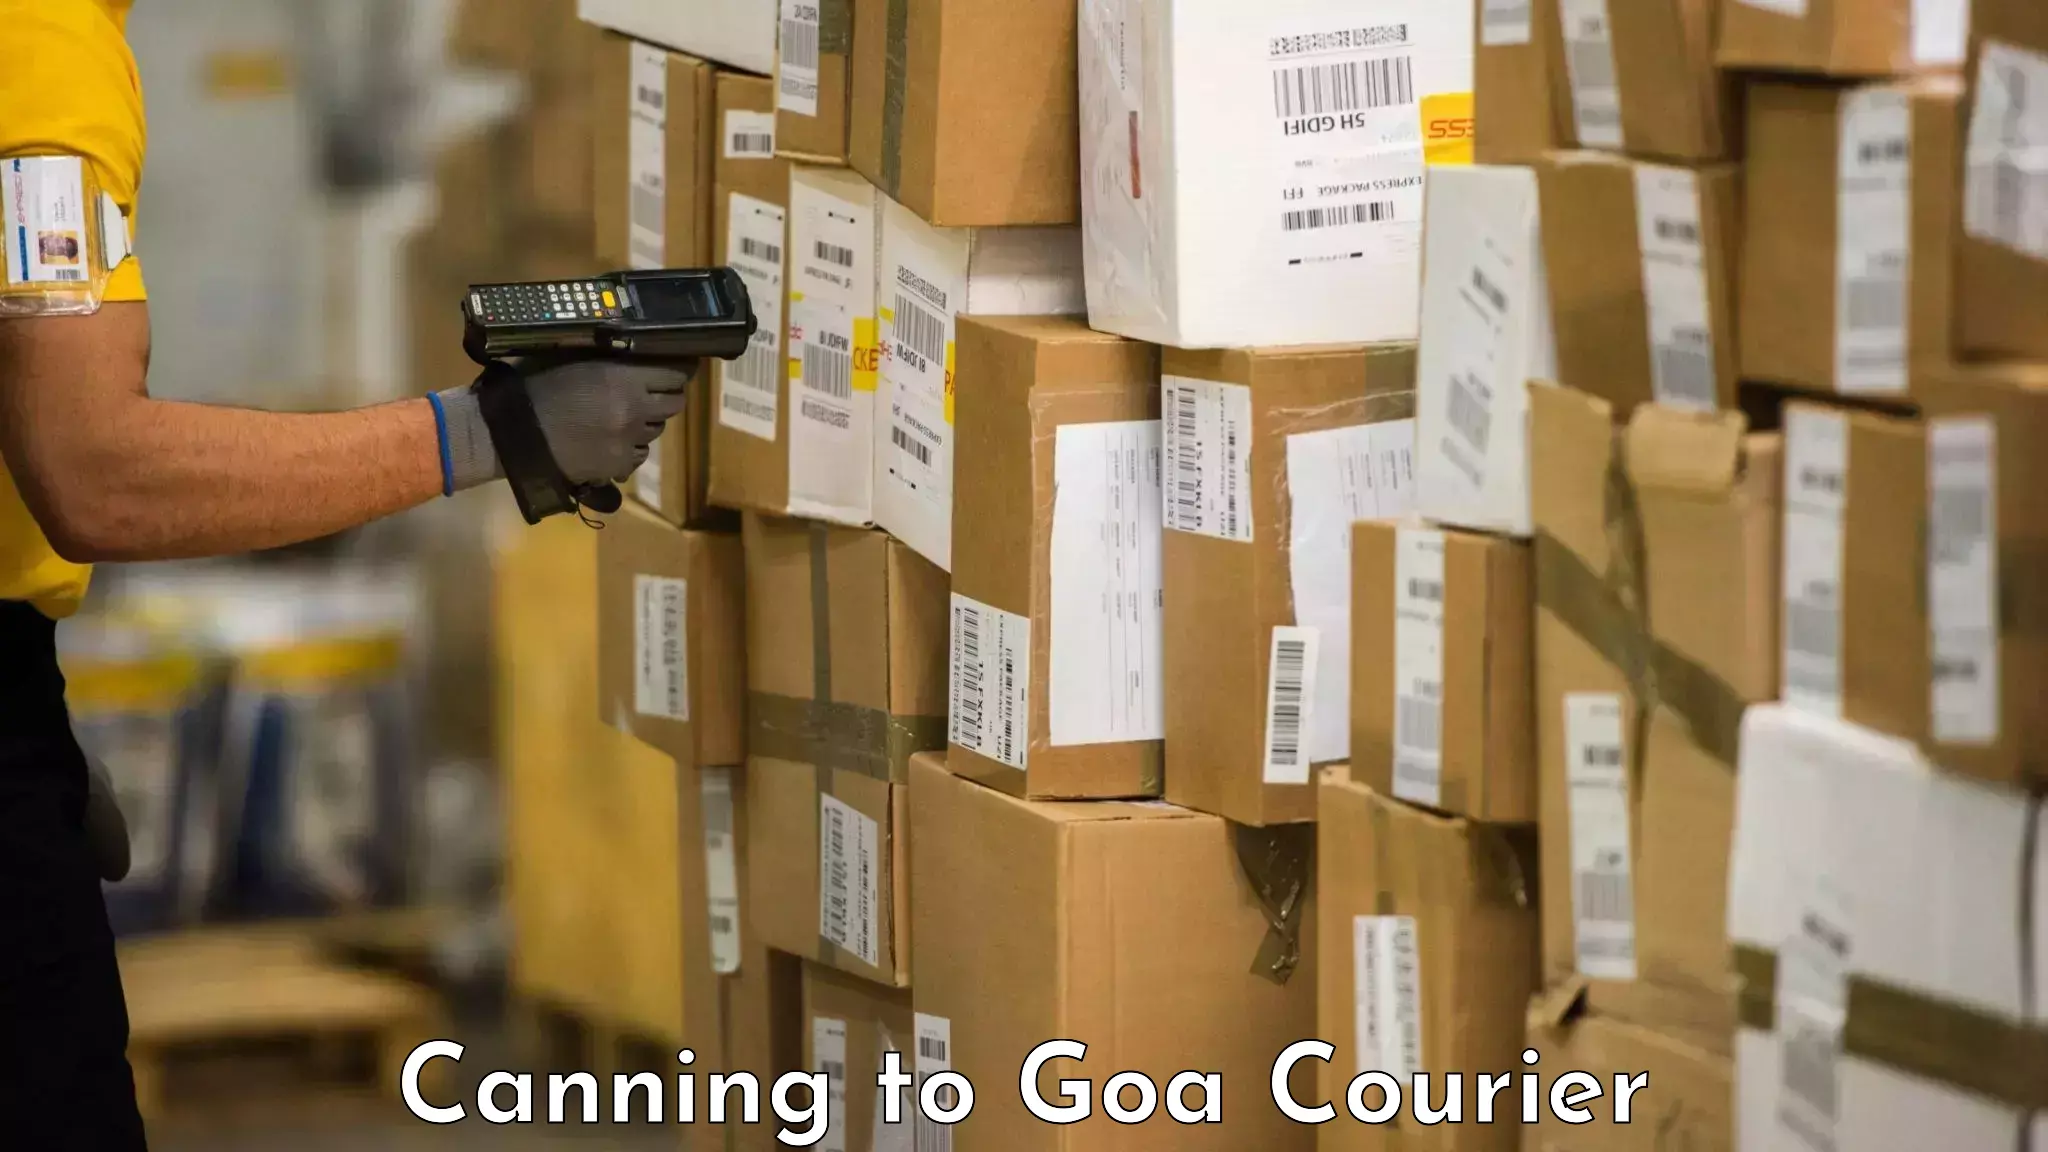 Same day luggage service Canning to Goa